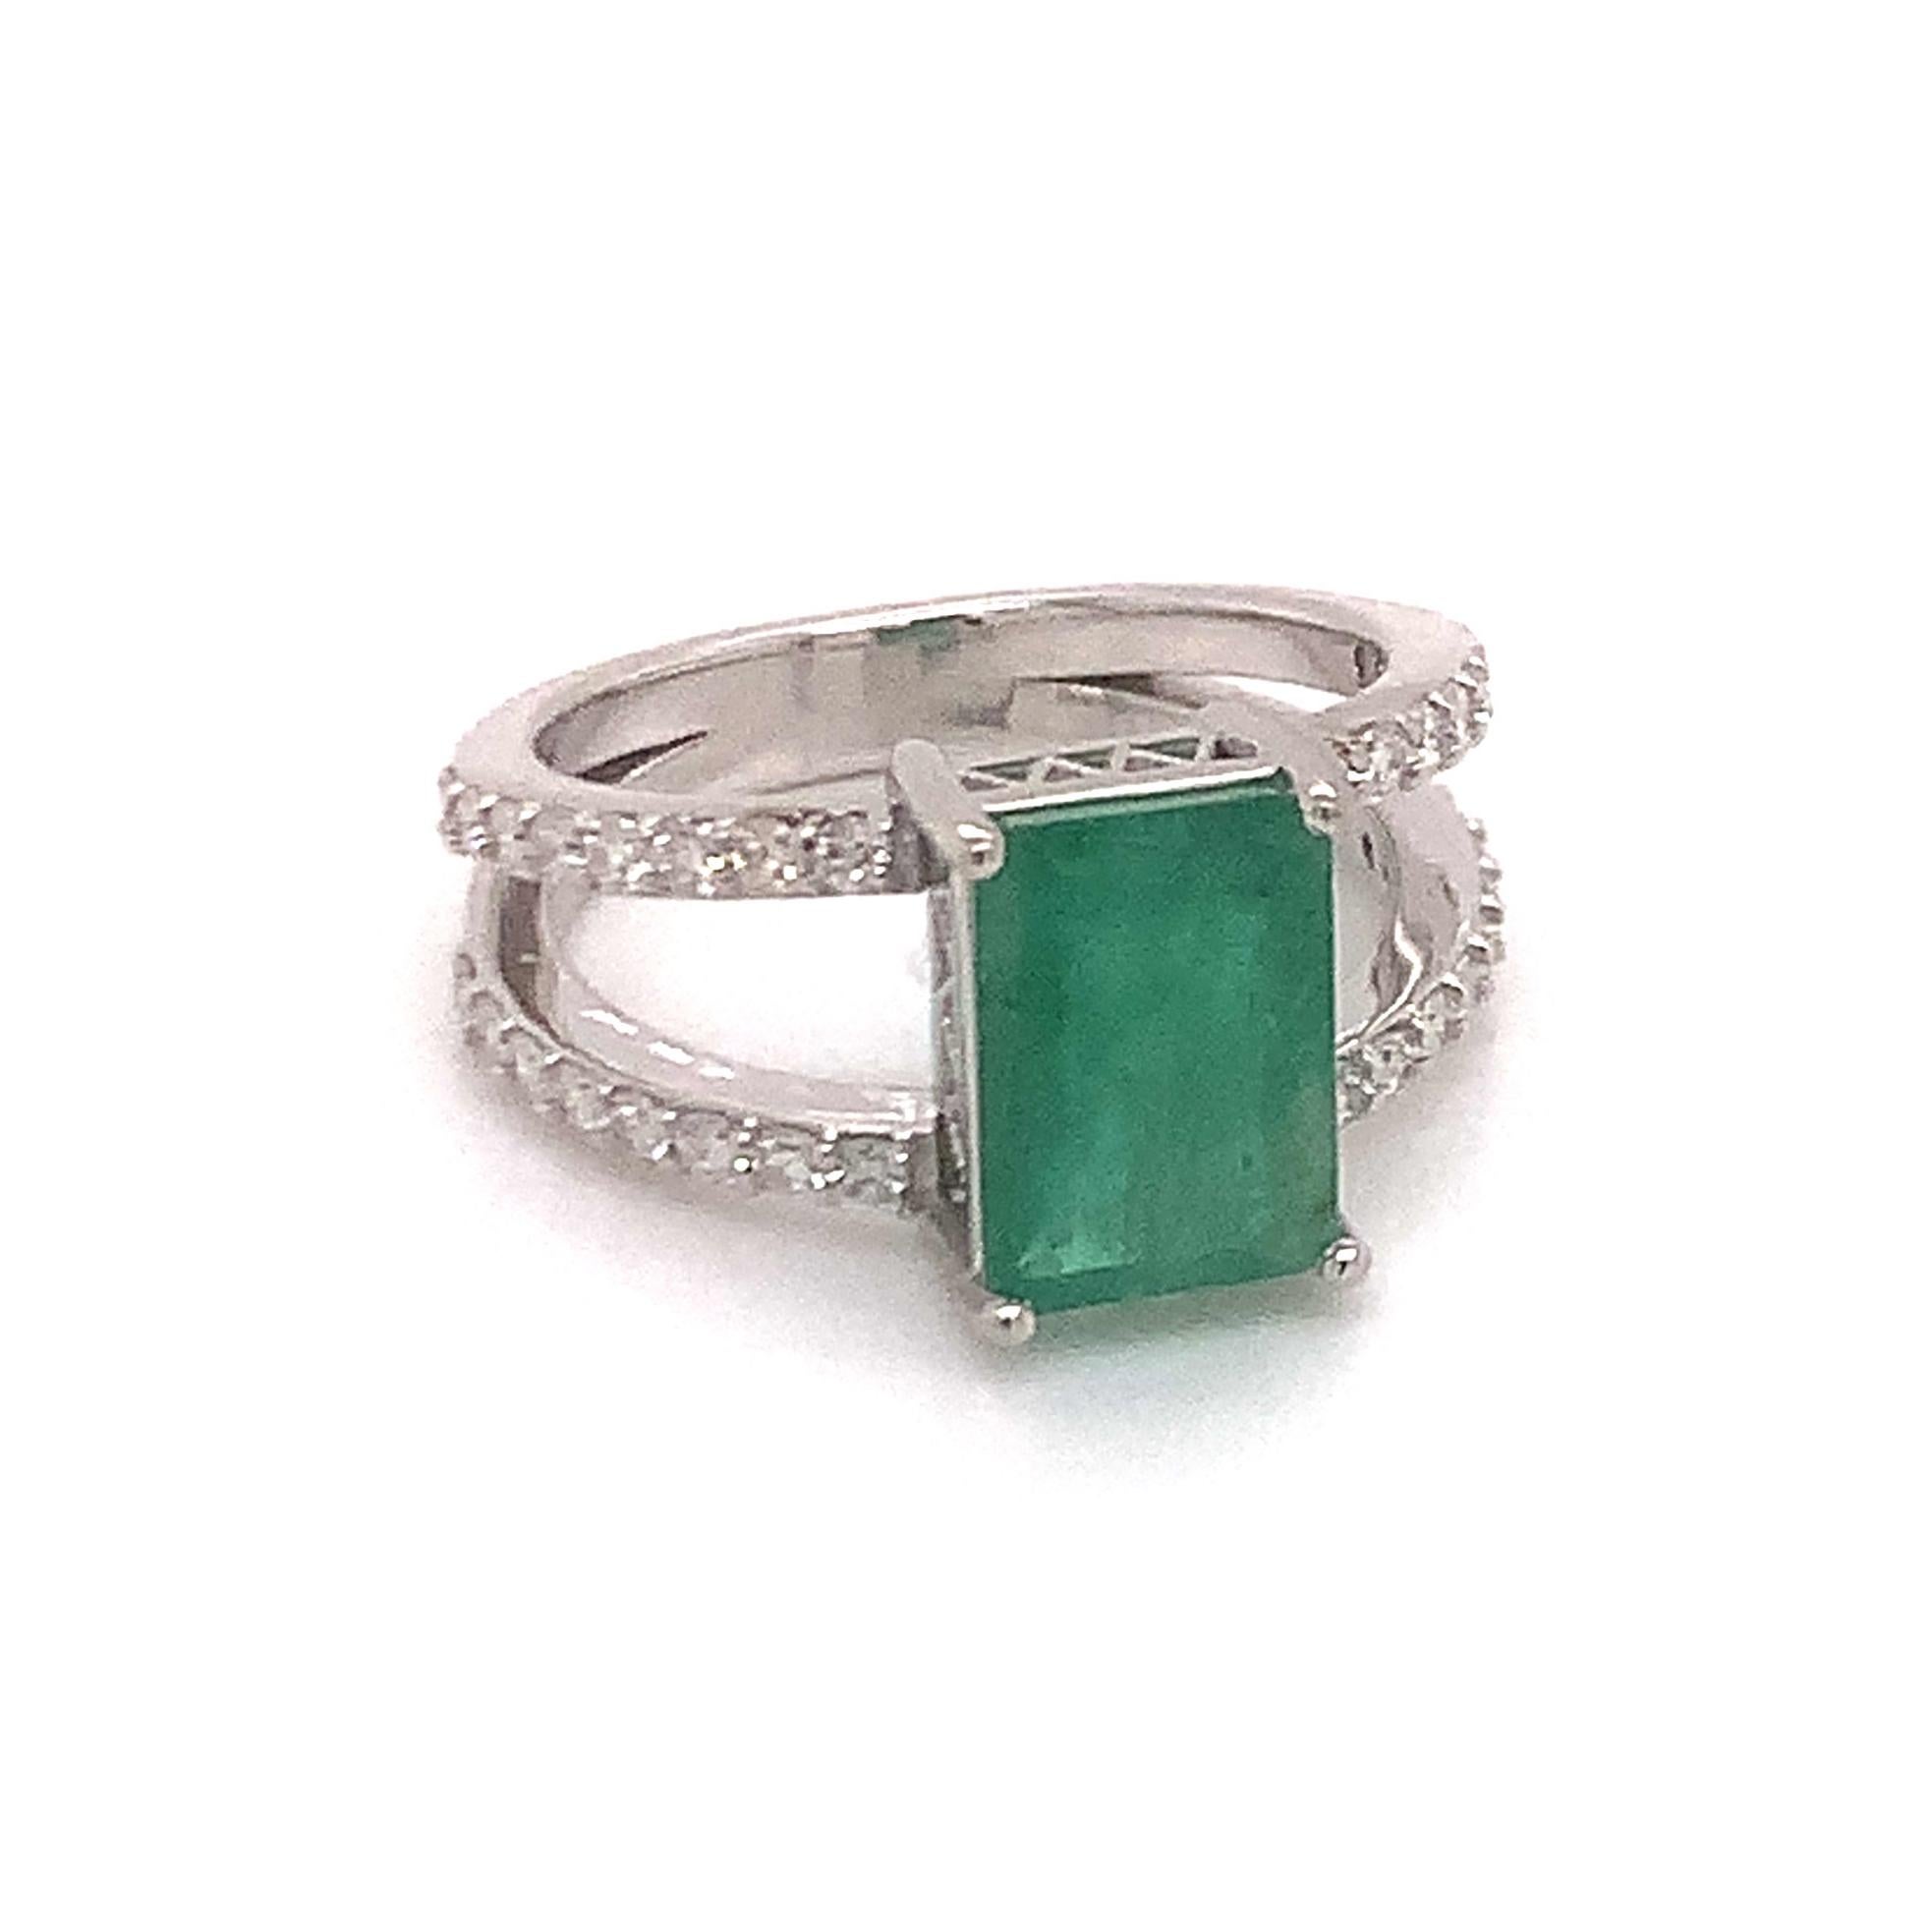 Natural Finely Faceted Quality Emerald Diamond Ring 14k Gold 2.85 TCW Size 7 Certified $5,970 111873

This is a Unique Custom Made Glamorous Piece of Jewelry!

Nothing says, “I Love you” more than Diamonds and Pearls!

This Emerald Diamond ring has